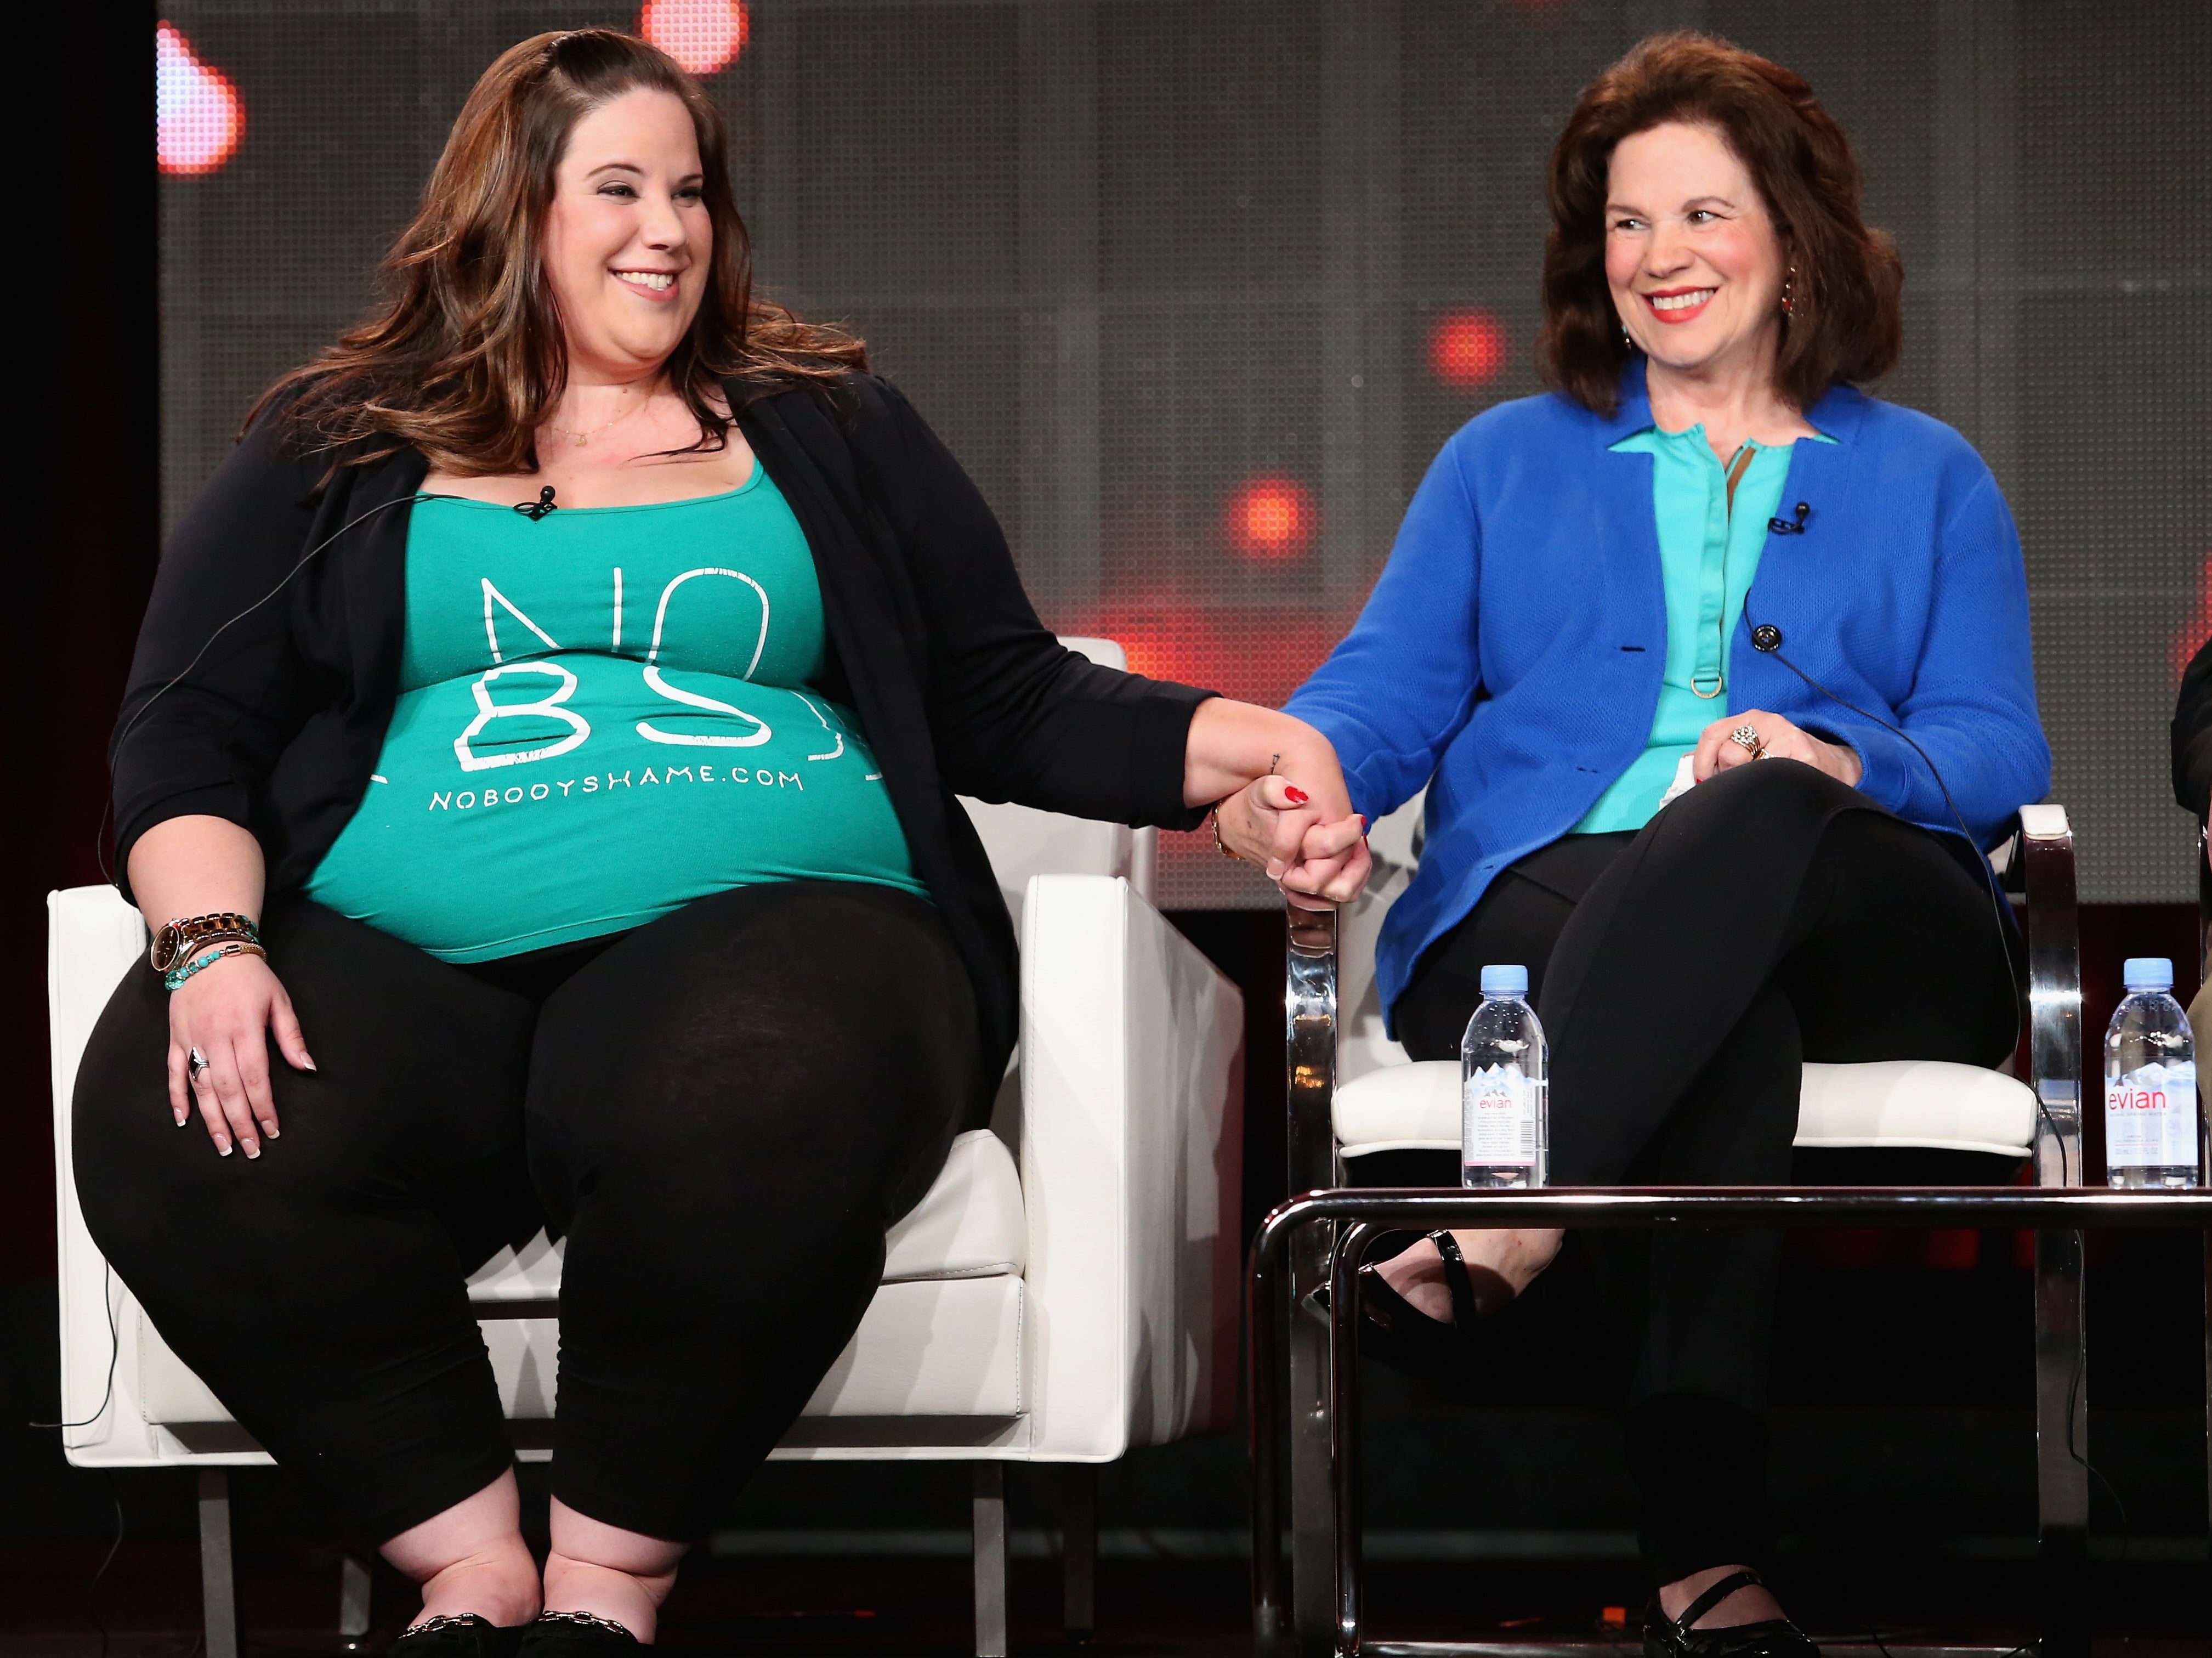 Whitney Thore, Founder of No Body Shame Campaign (L) and Barbara Thore speak onstage during TLC's 'My Big Fat Fabulous Life' panel at Discovery Communications' 2015 Winter Television Critics Association press tour at the Langham Hotel on January 8, 2015